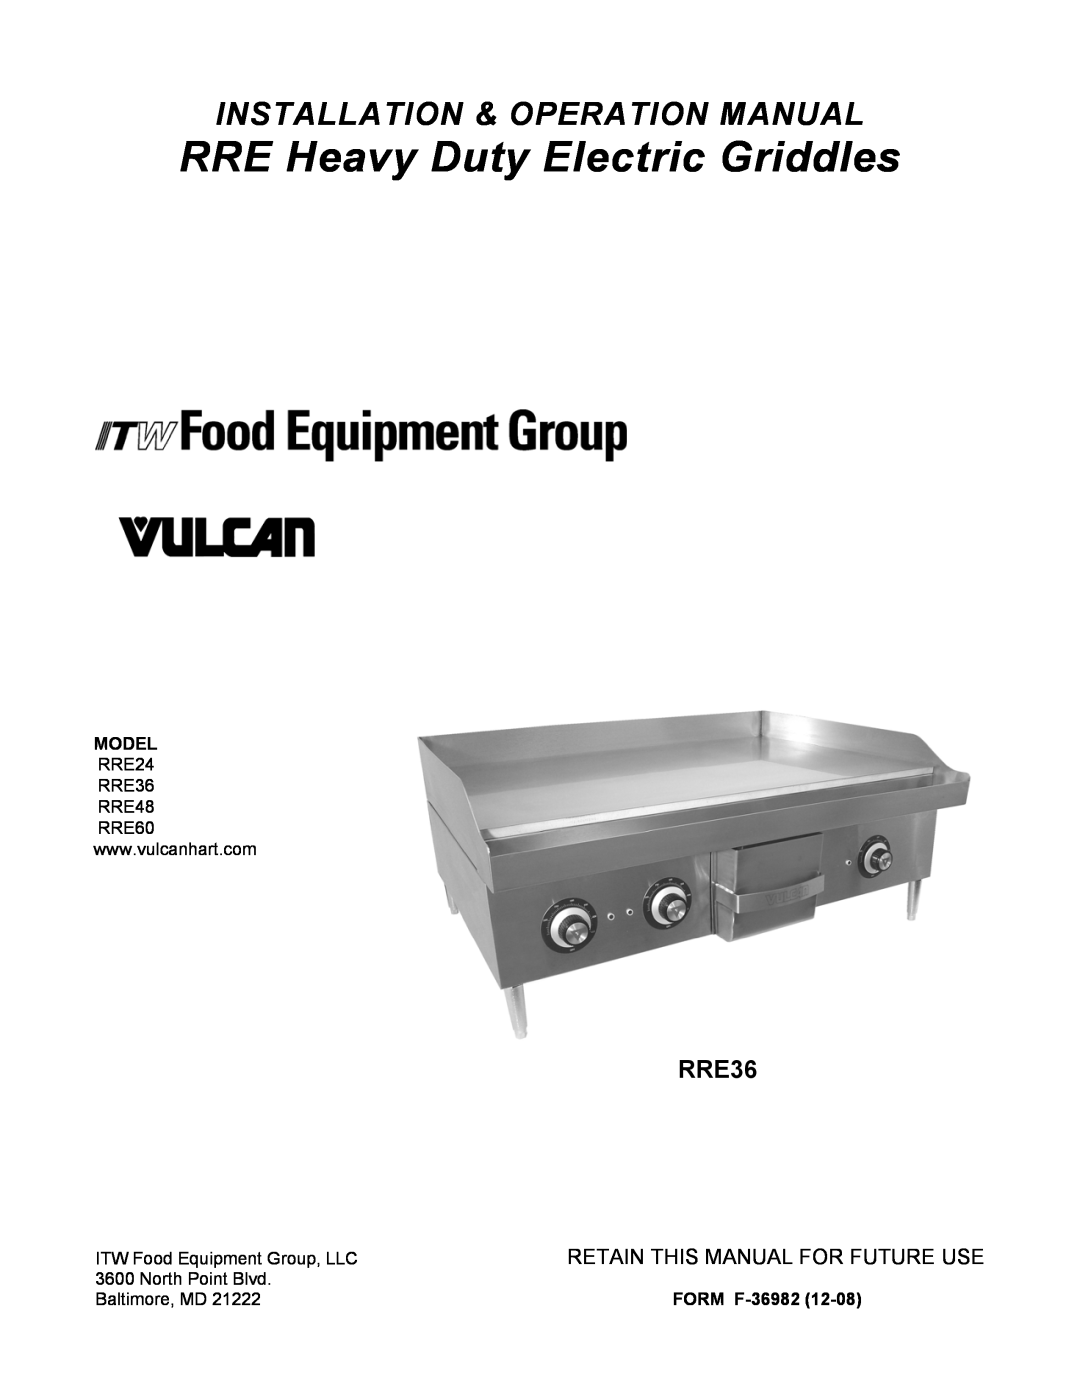 Vulcan-Hart RRE36, RRE60, RRE24 operation manual RRE Heavy Duty Electric Griddles, Retain This Manual For Future Use, Model 